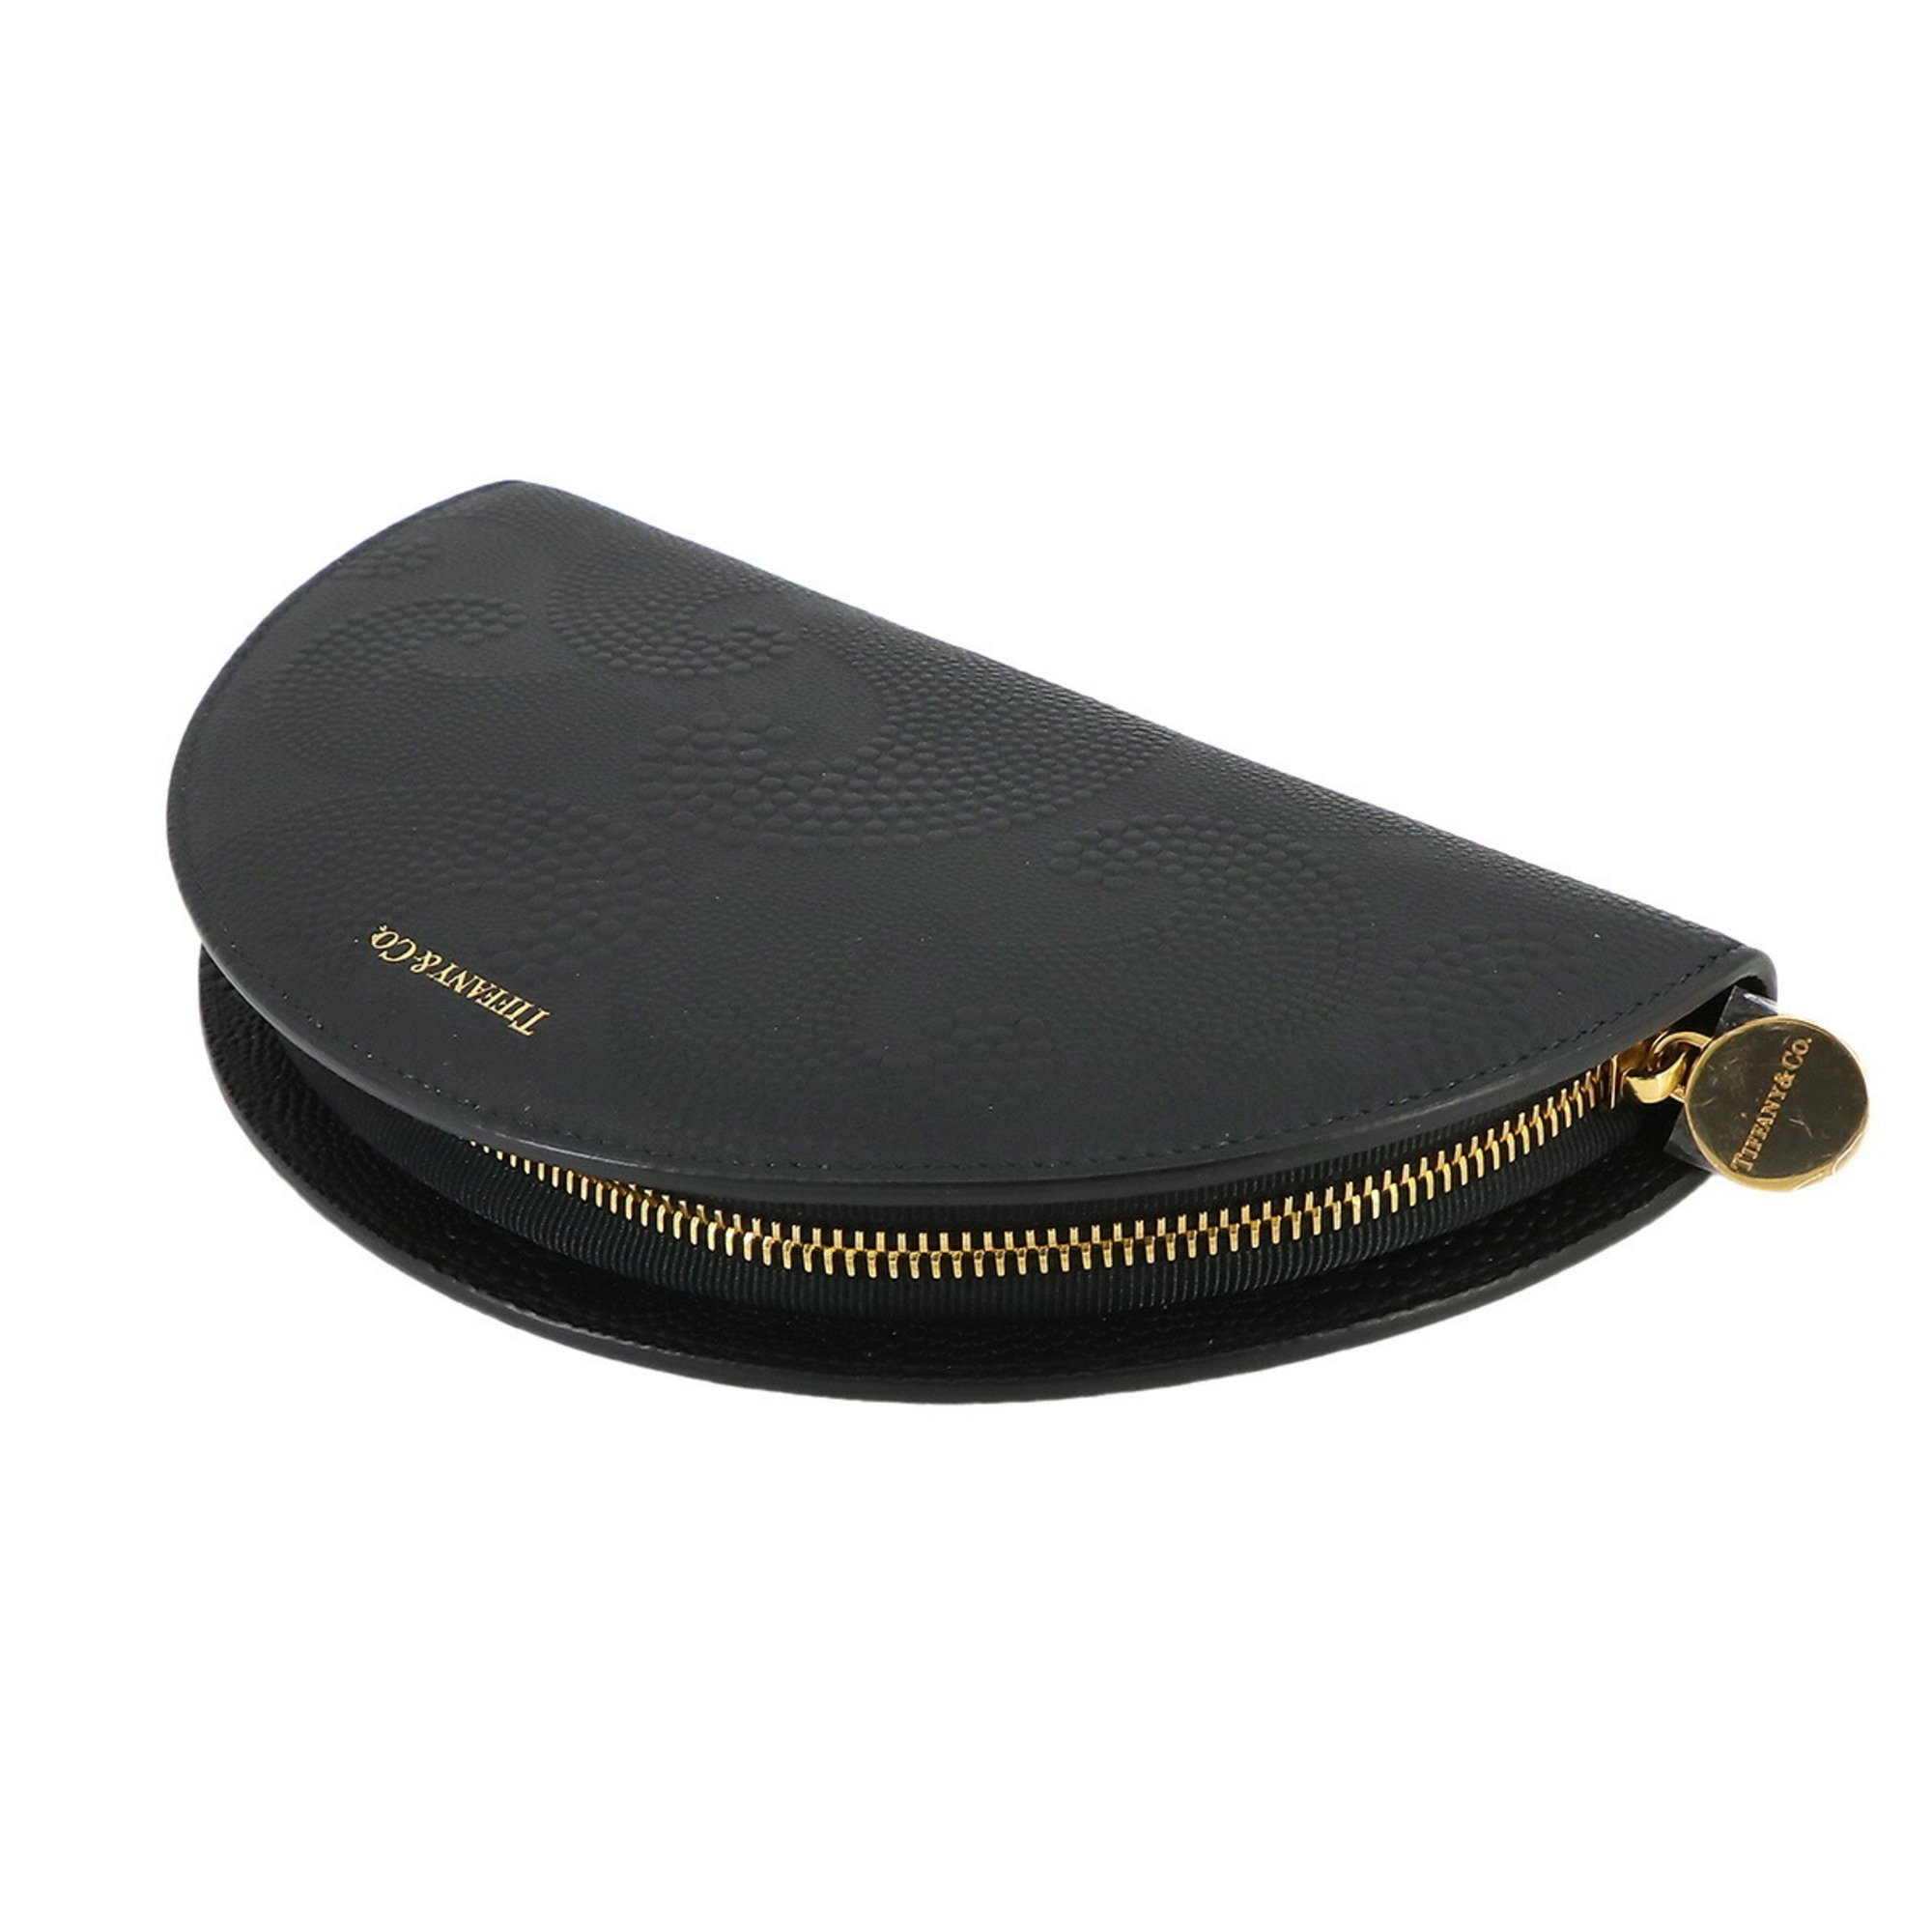 Tiffany & Co. Half Moon Round Wallet Leather Black Gold Hardware